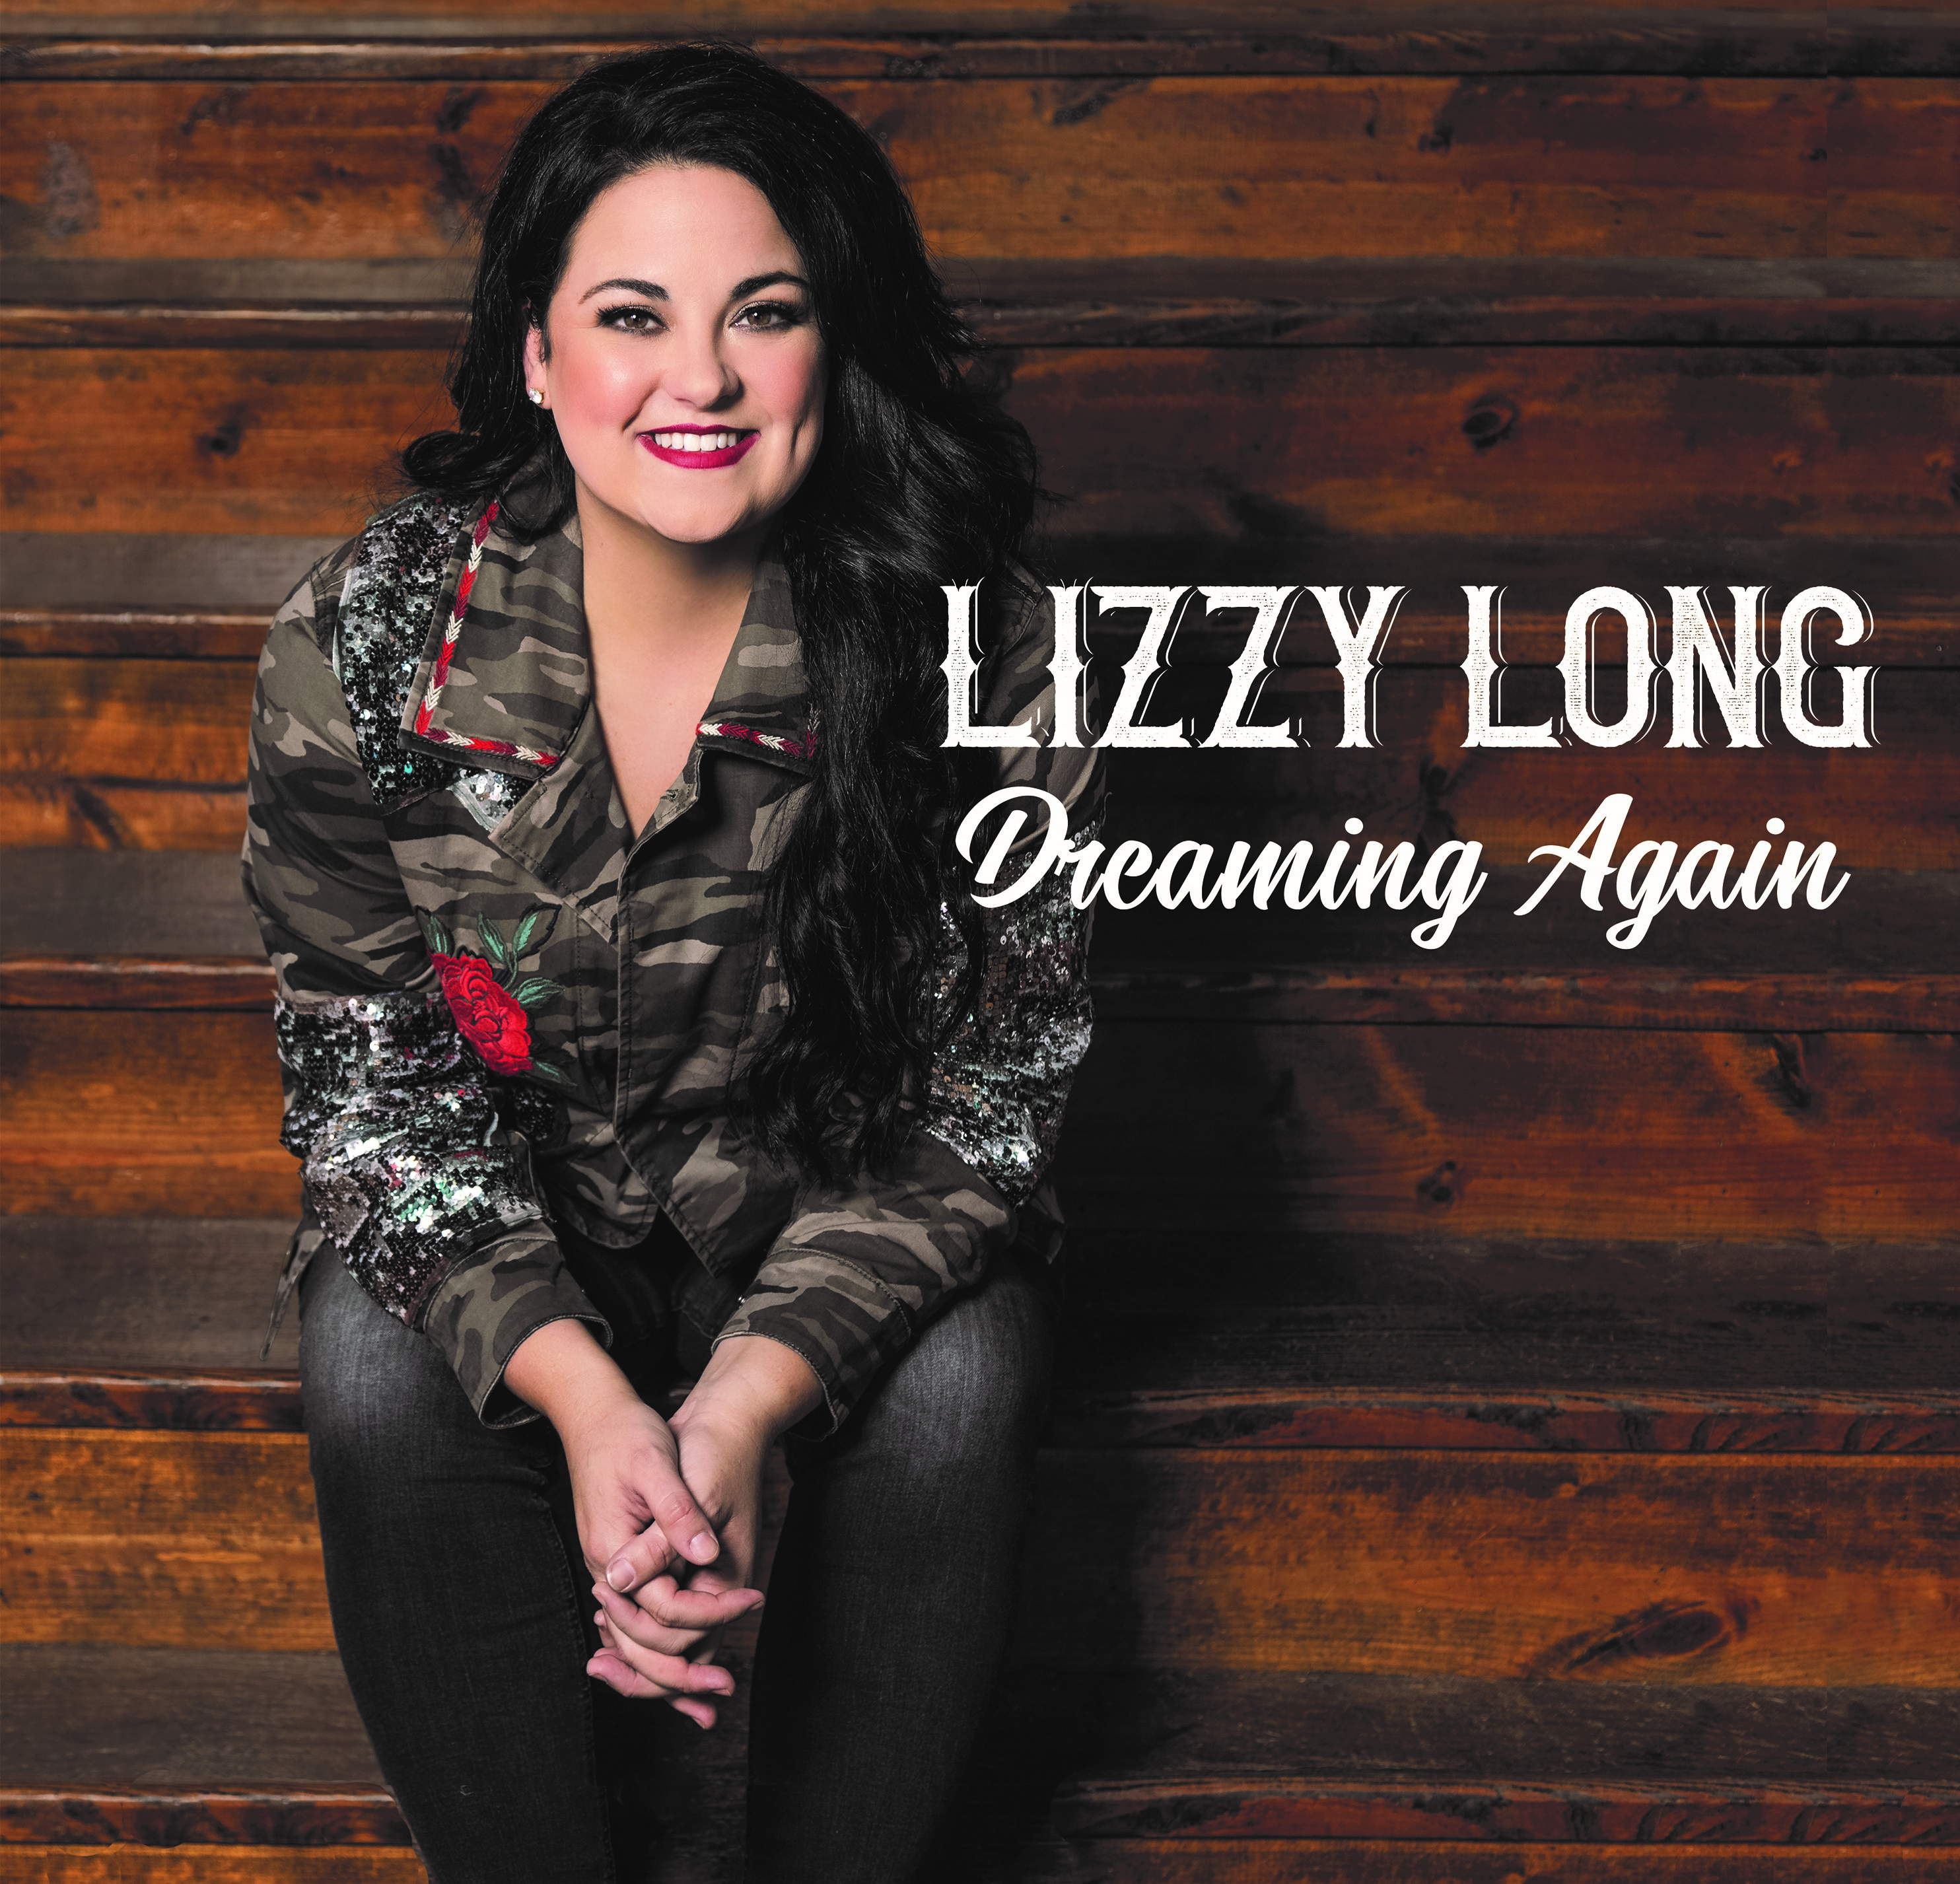 Lizzy Long Releases Her Sophomore Album Dreaming Again